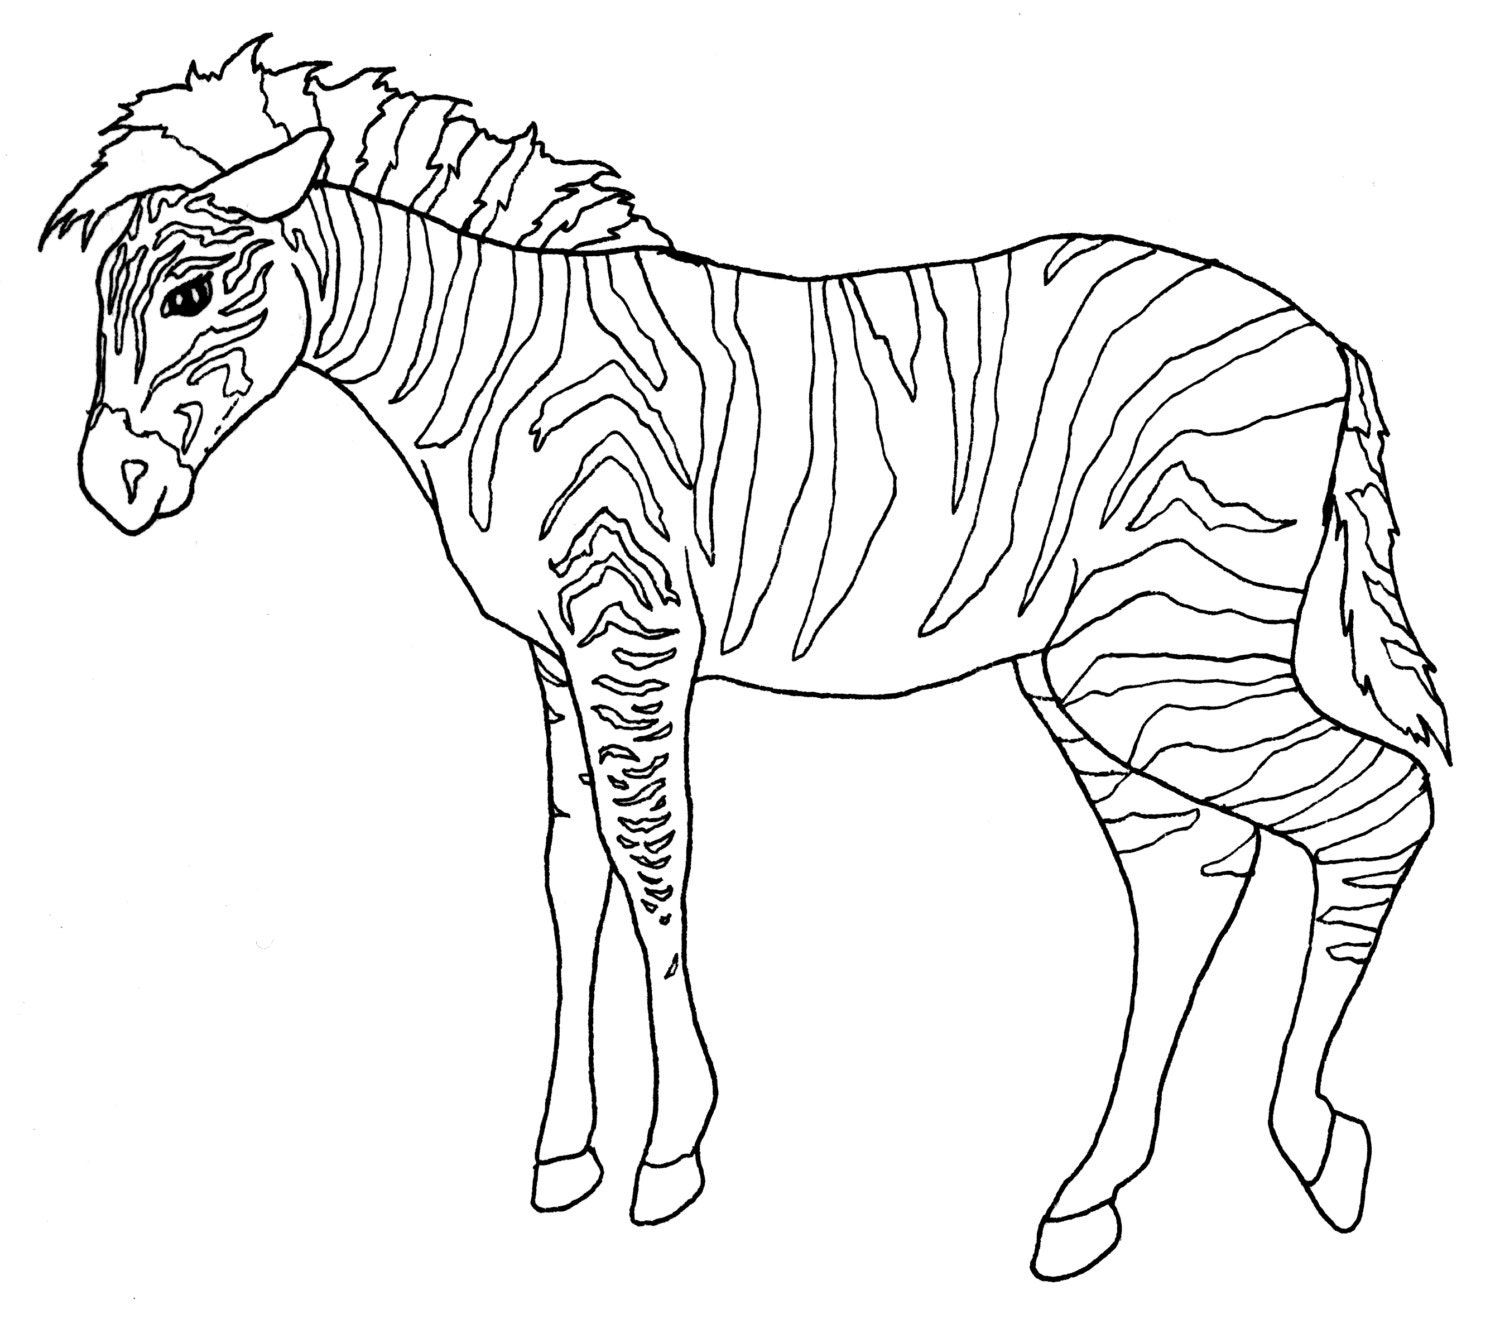 Download DIGITAL DOWNLOAD Zoo Animal Adult Coloring Book Pages Wild